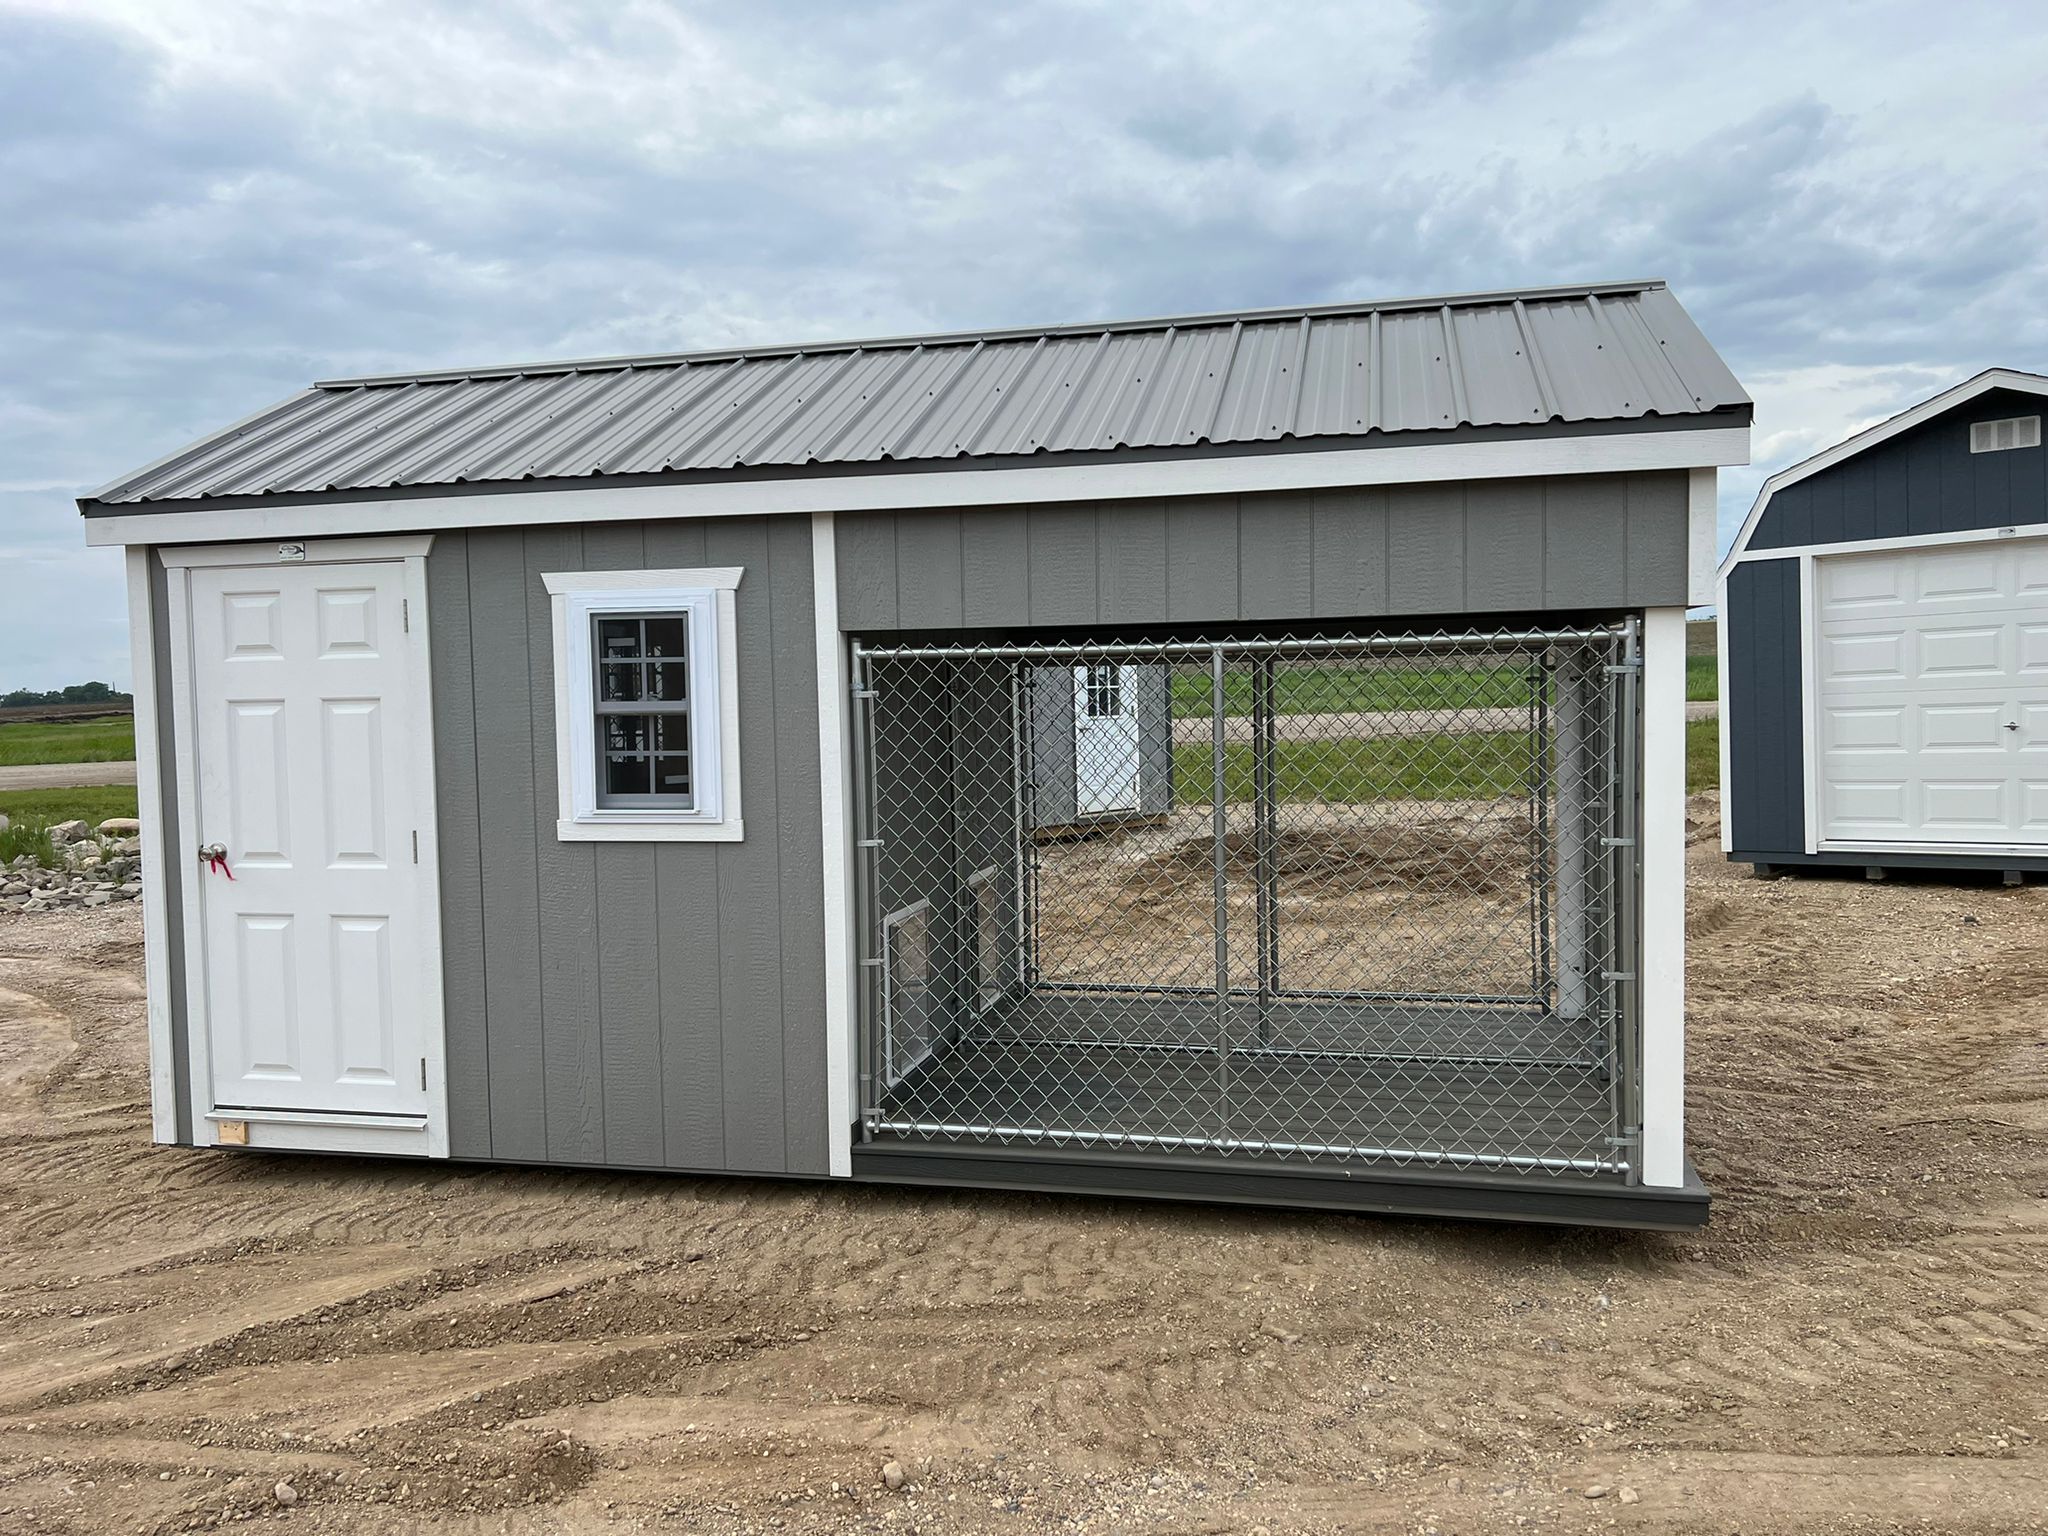 8'x16' A-Frame Double Dog Kennel with Feed Room For Sale| #137132 |  Northland Sheds